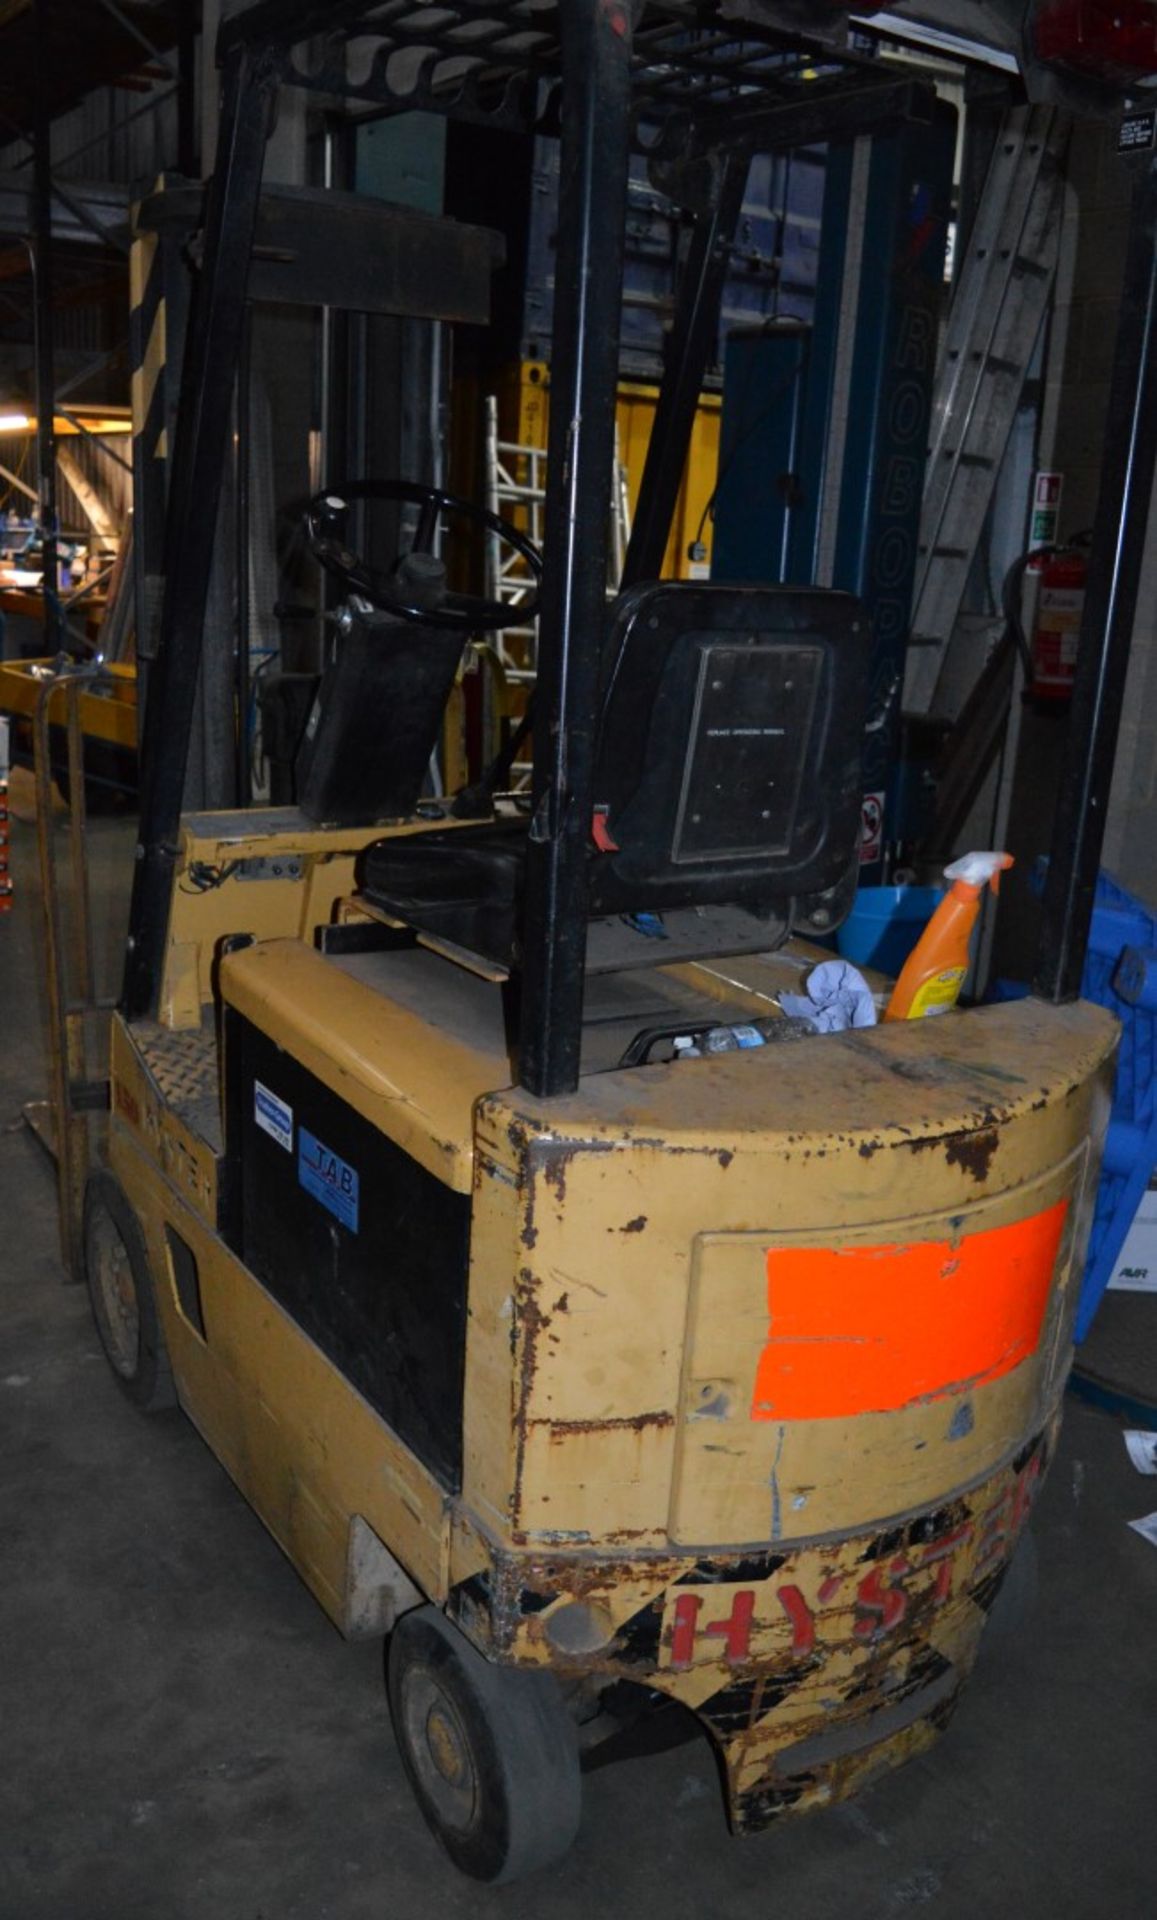 1 x Hyster 1.50 Electric Counter Balance Forklift Truck - 1200kg Lift Capacity - With Charger - Good - Image 13 of 15